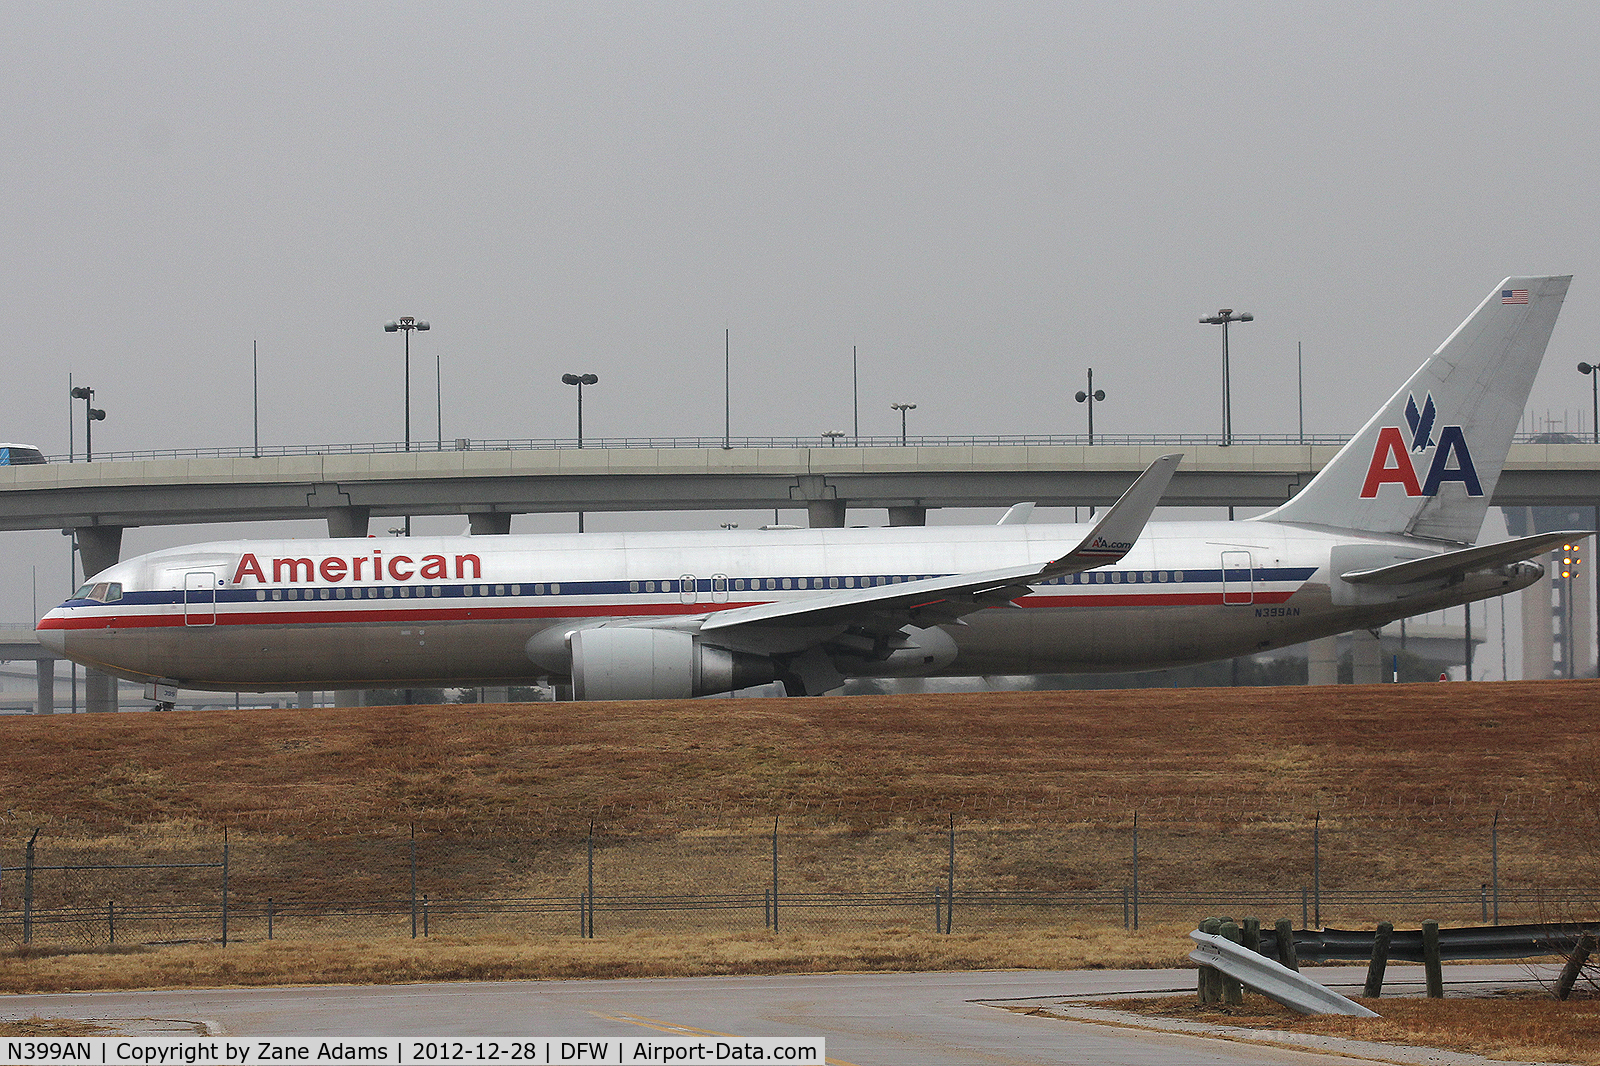 N399AN, 1999 Boeing 767-323/ER(BDSF) C/N 29606, American Airlines 767 at DFW Airport